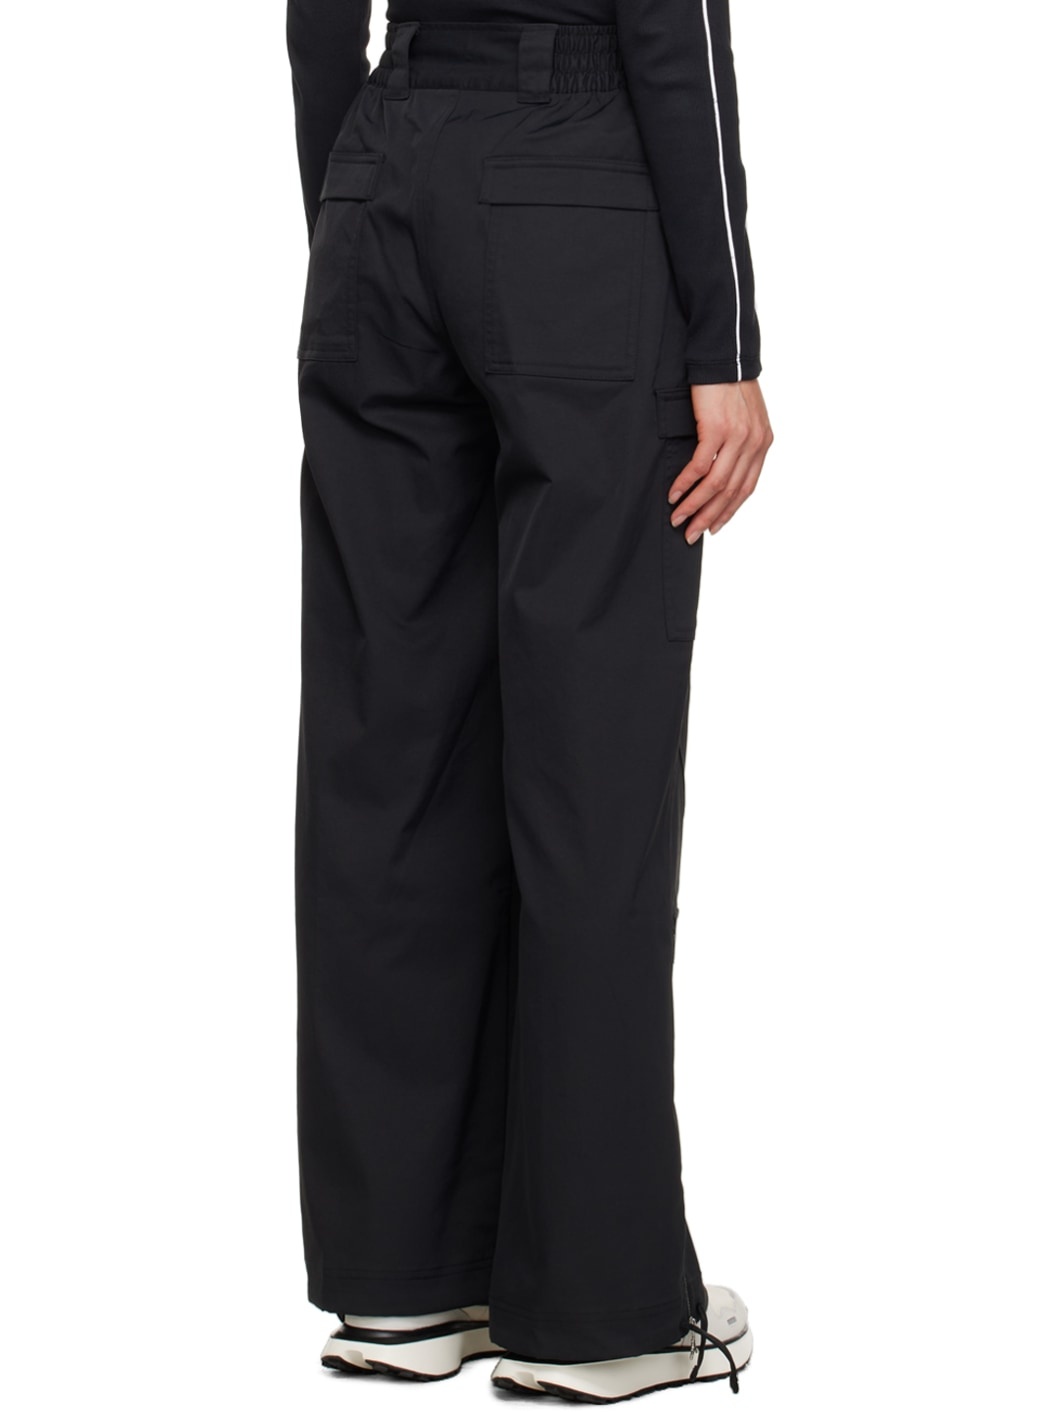 Black Chicago Trousers - 3